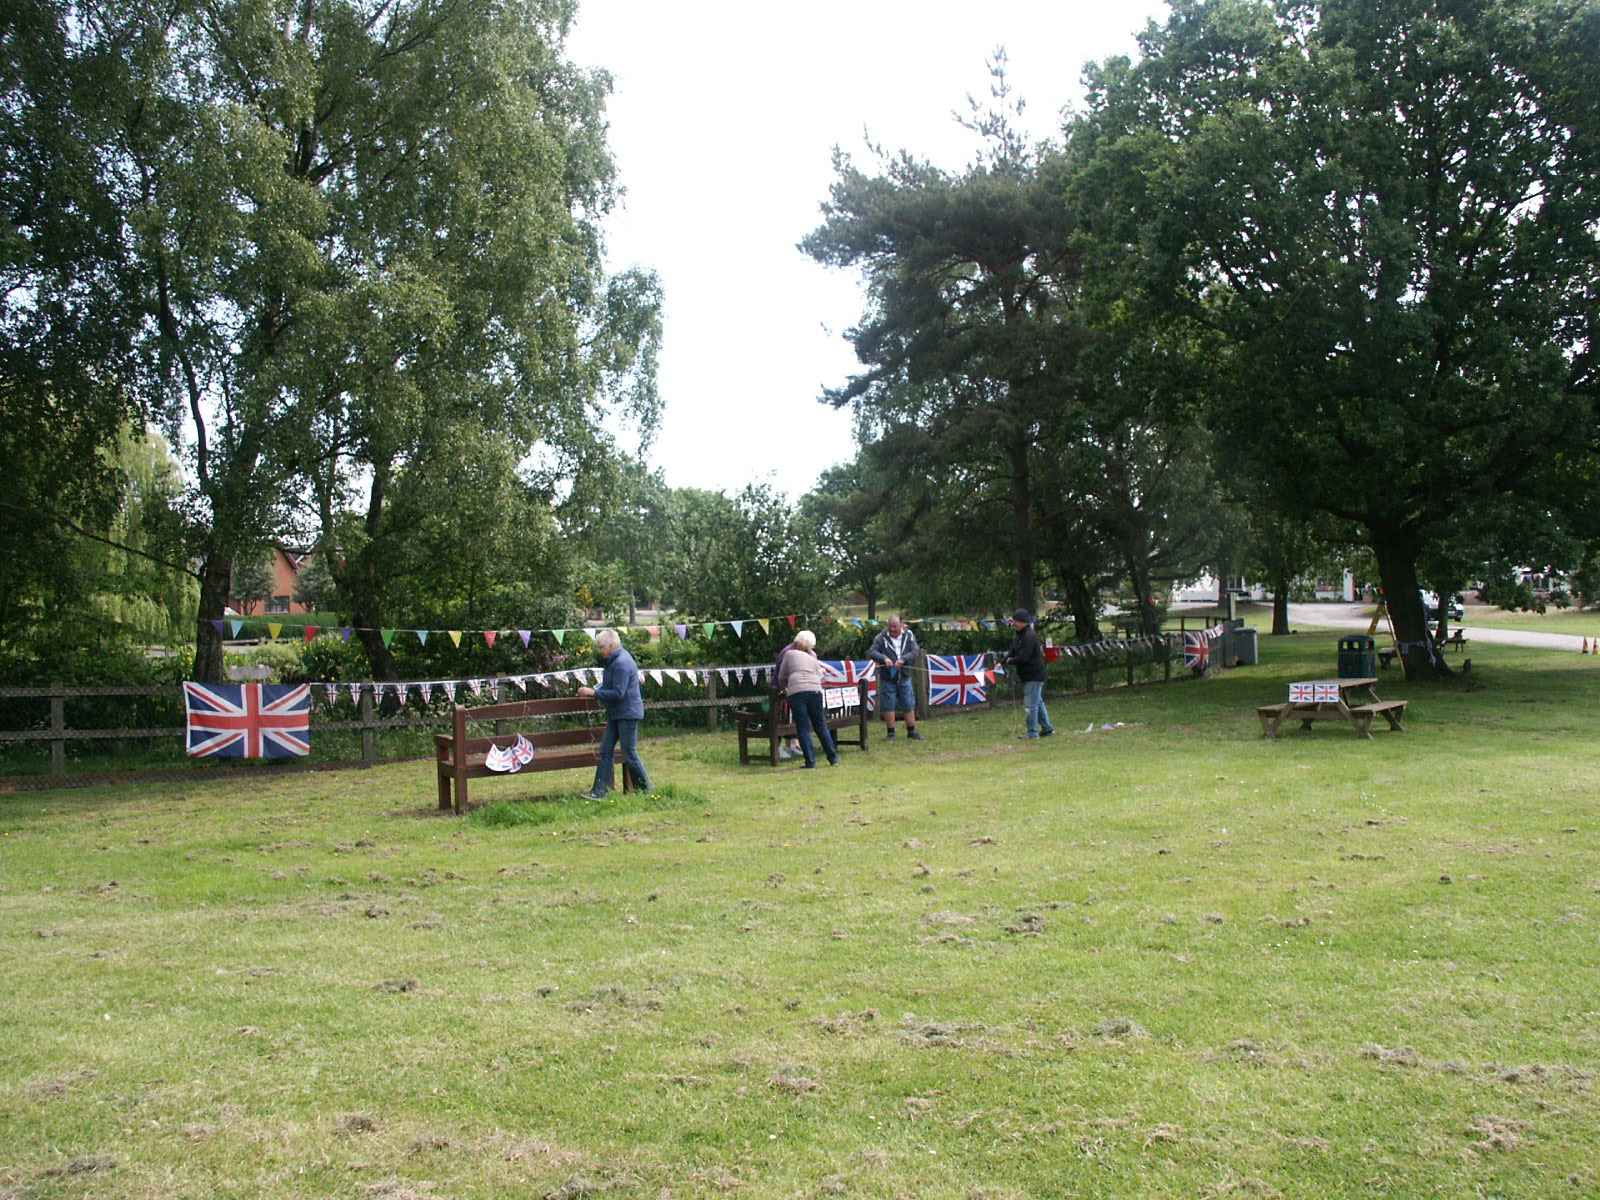 Preparations for the Jubilee Picnic, June 4th